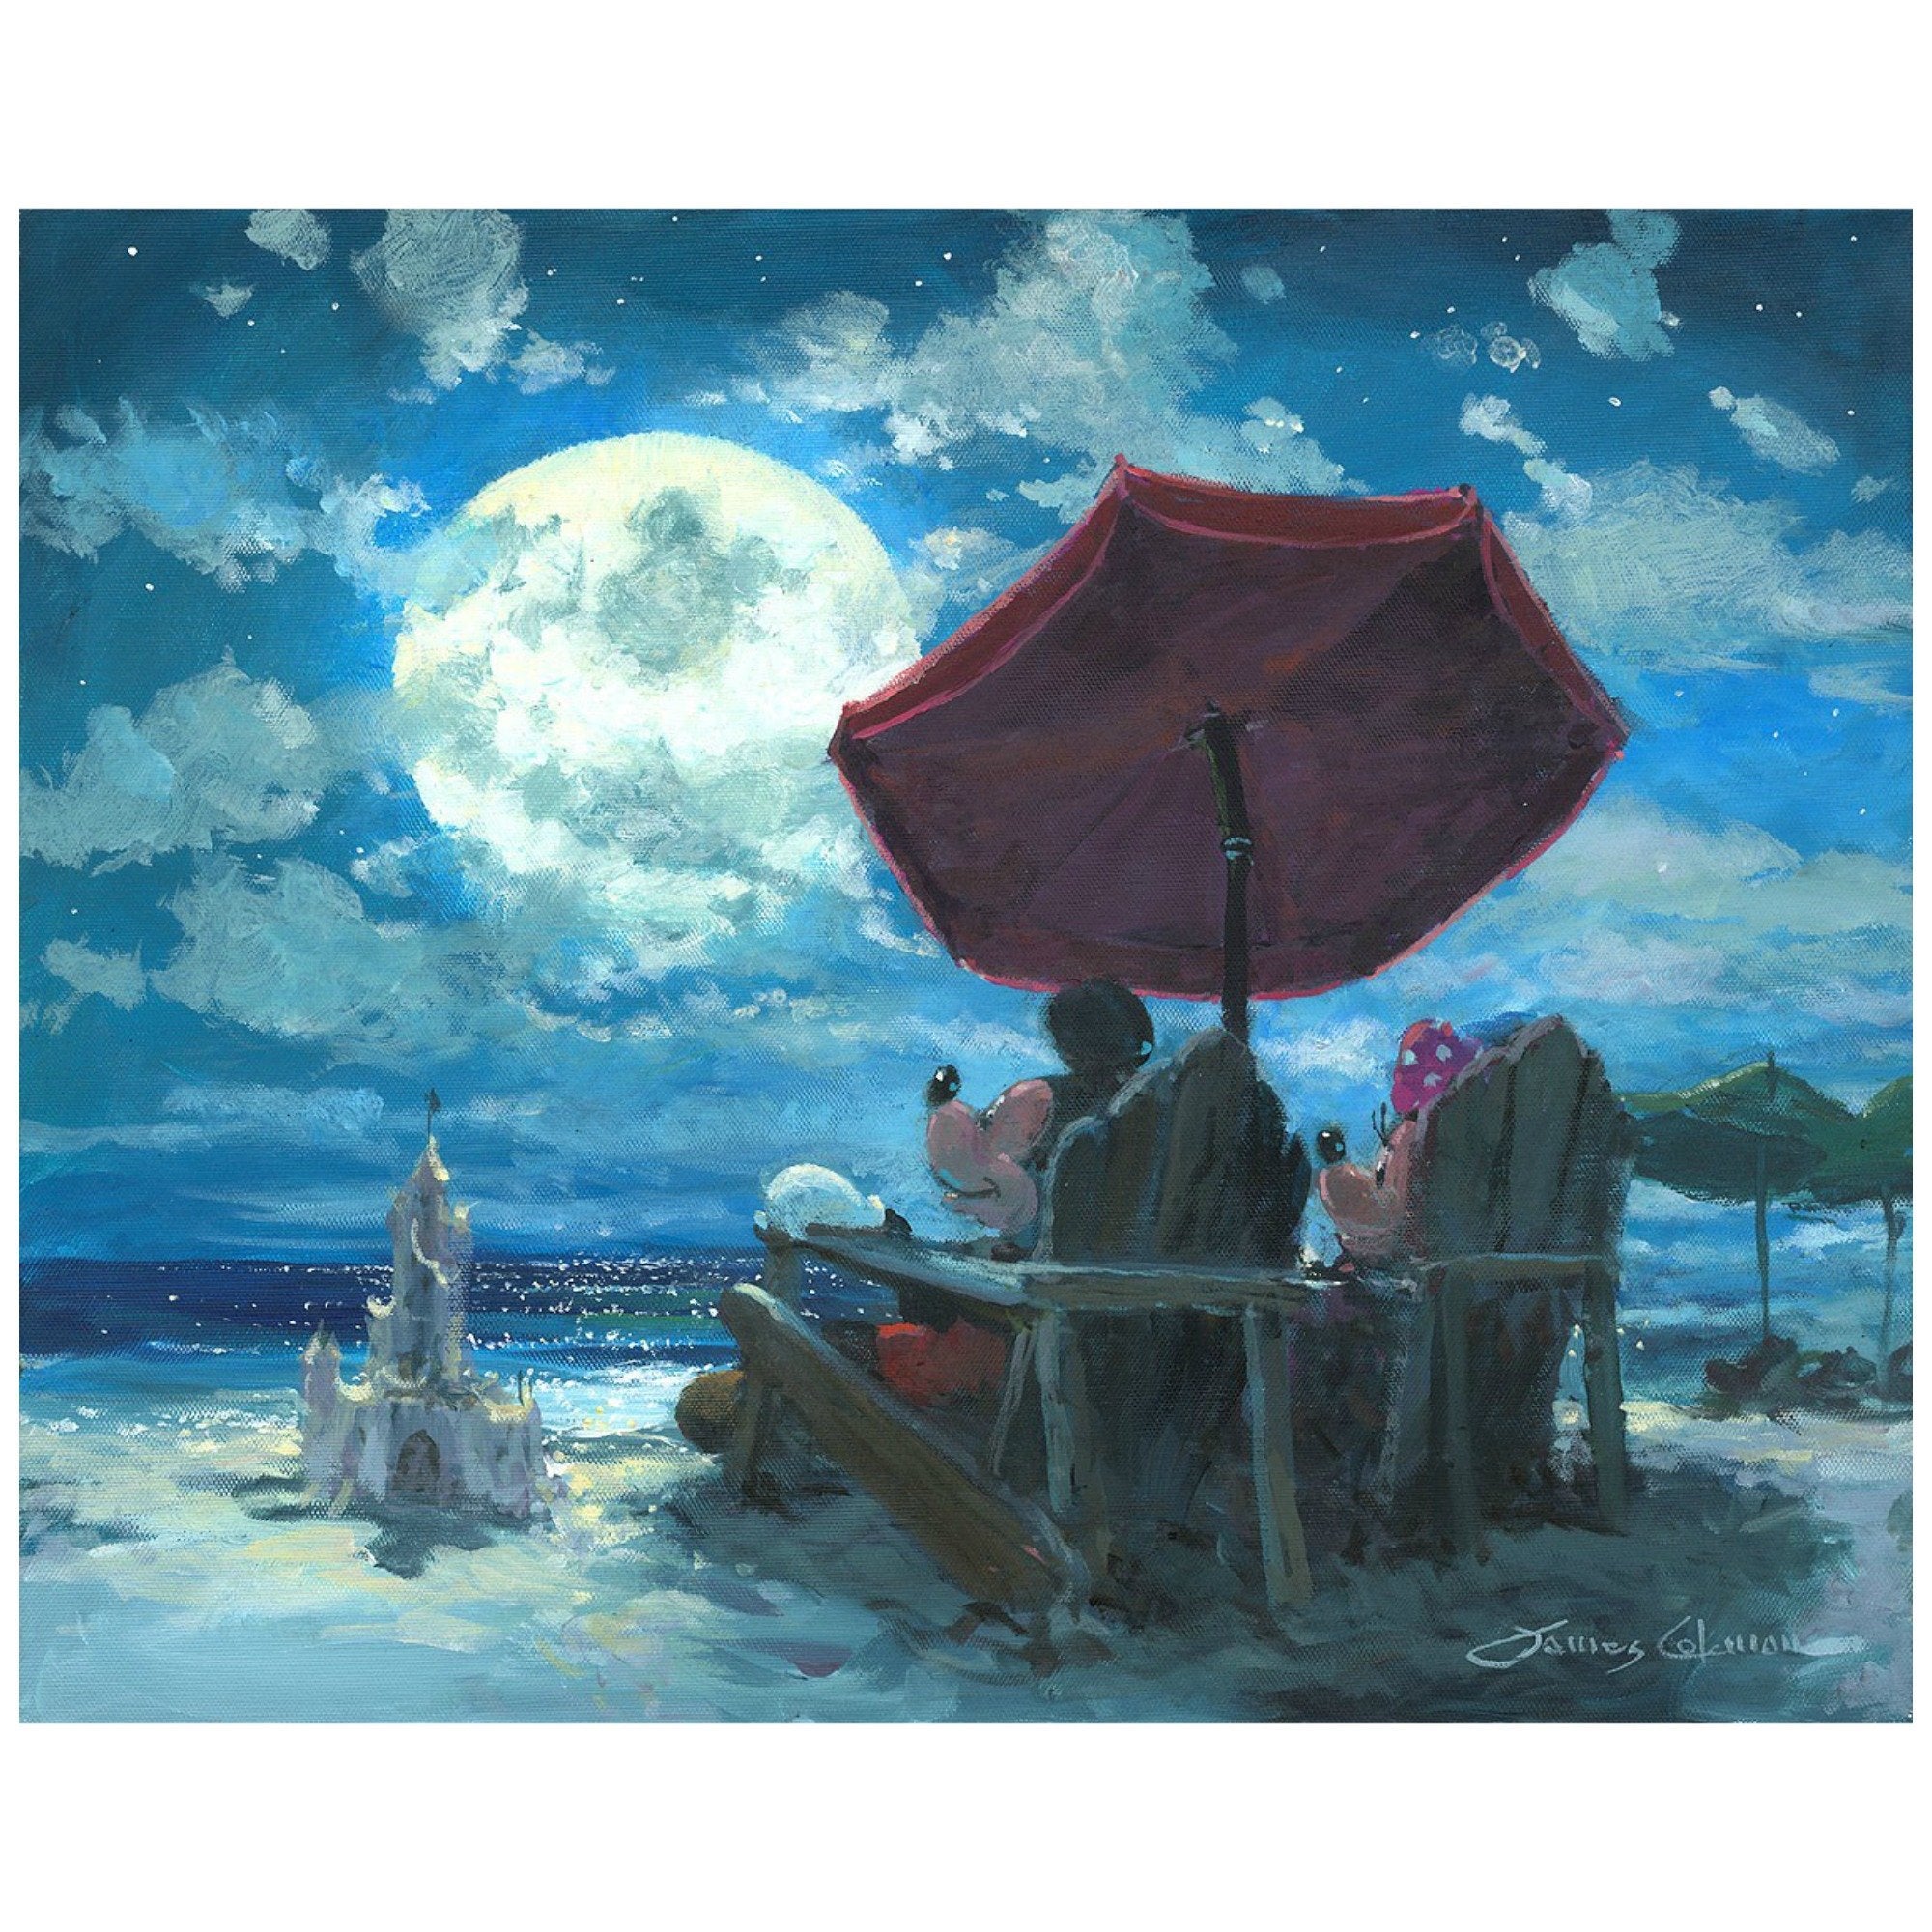 Under the Moonlight by James Coleman   Mickey and Minnie are enjoying the moonlight evening at the beach while relaxing in their favorite on Adirondack chairs under the red umbrella.